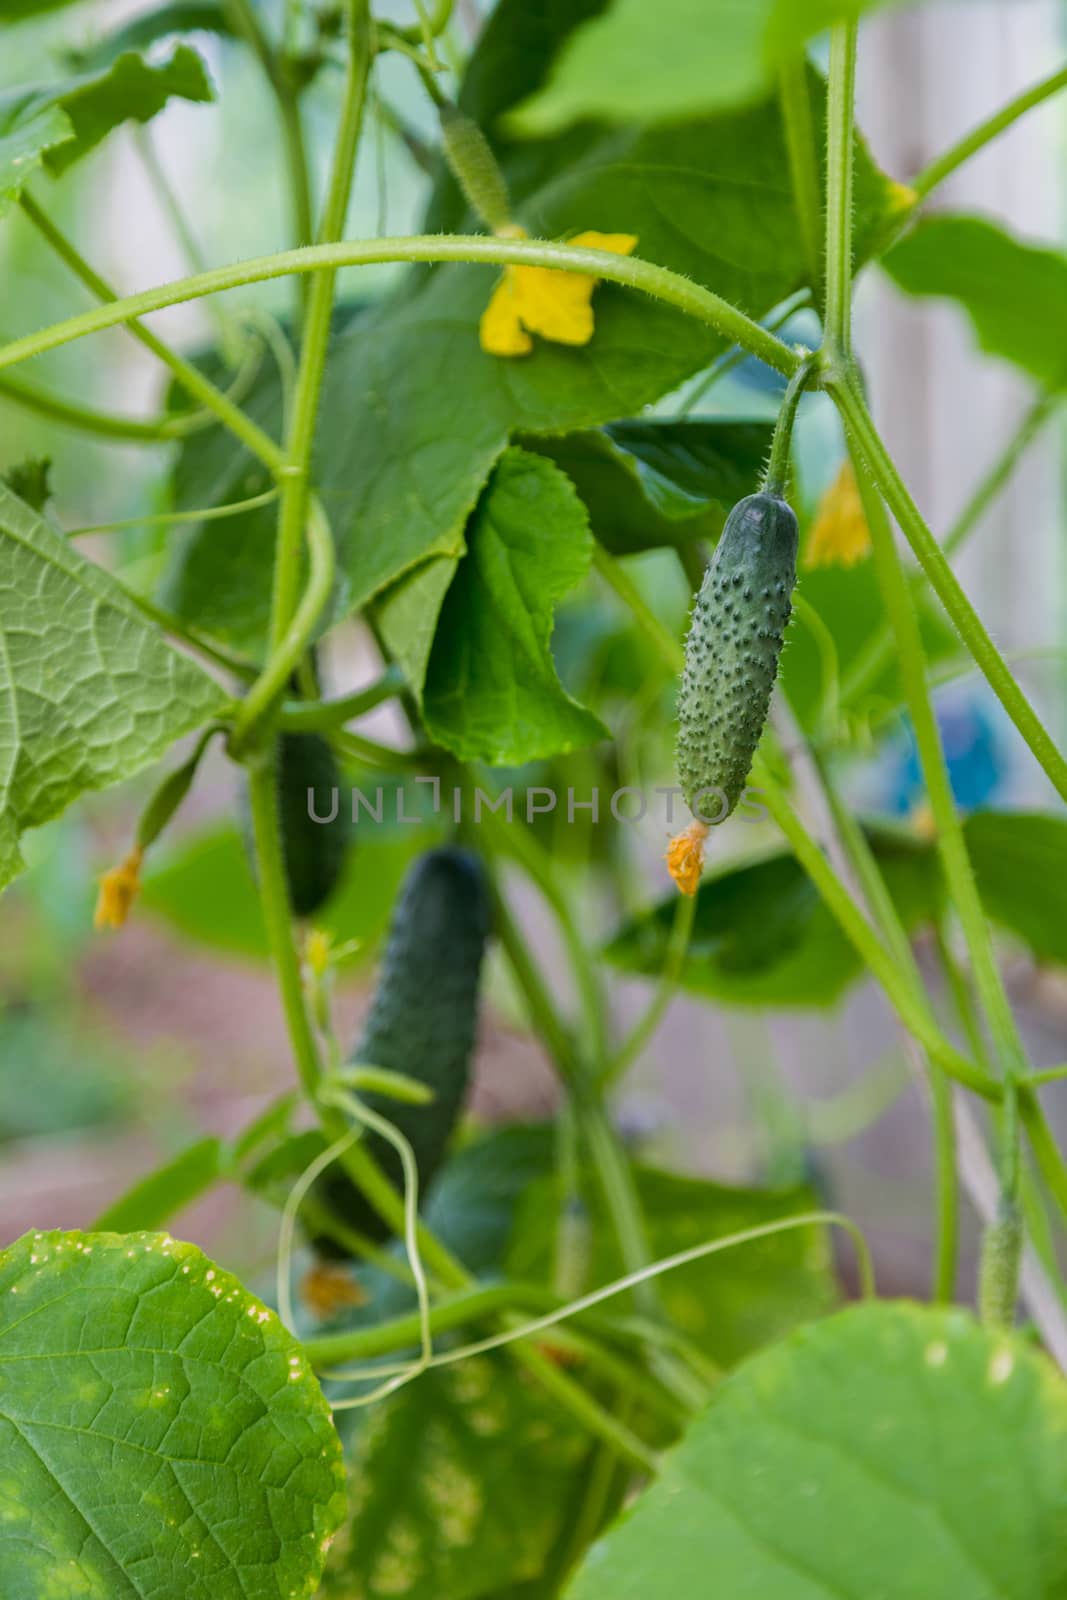 Green cucumber on a branch with yellow flowers by galinasharapova